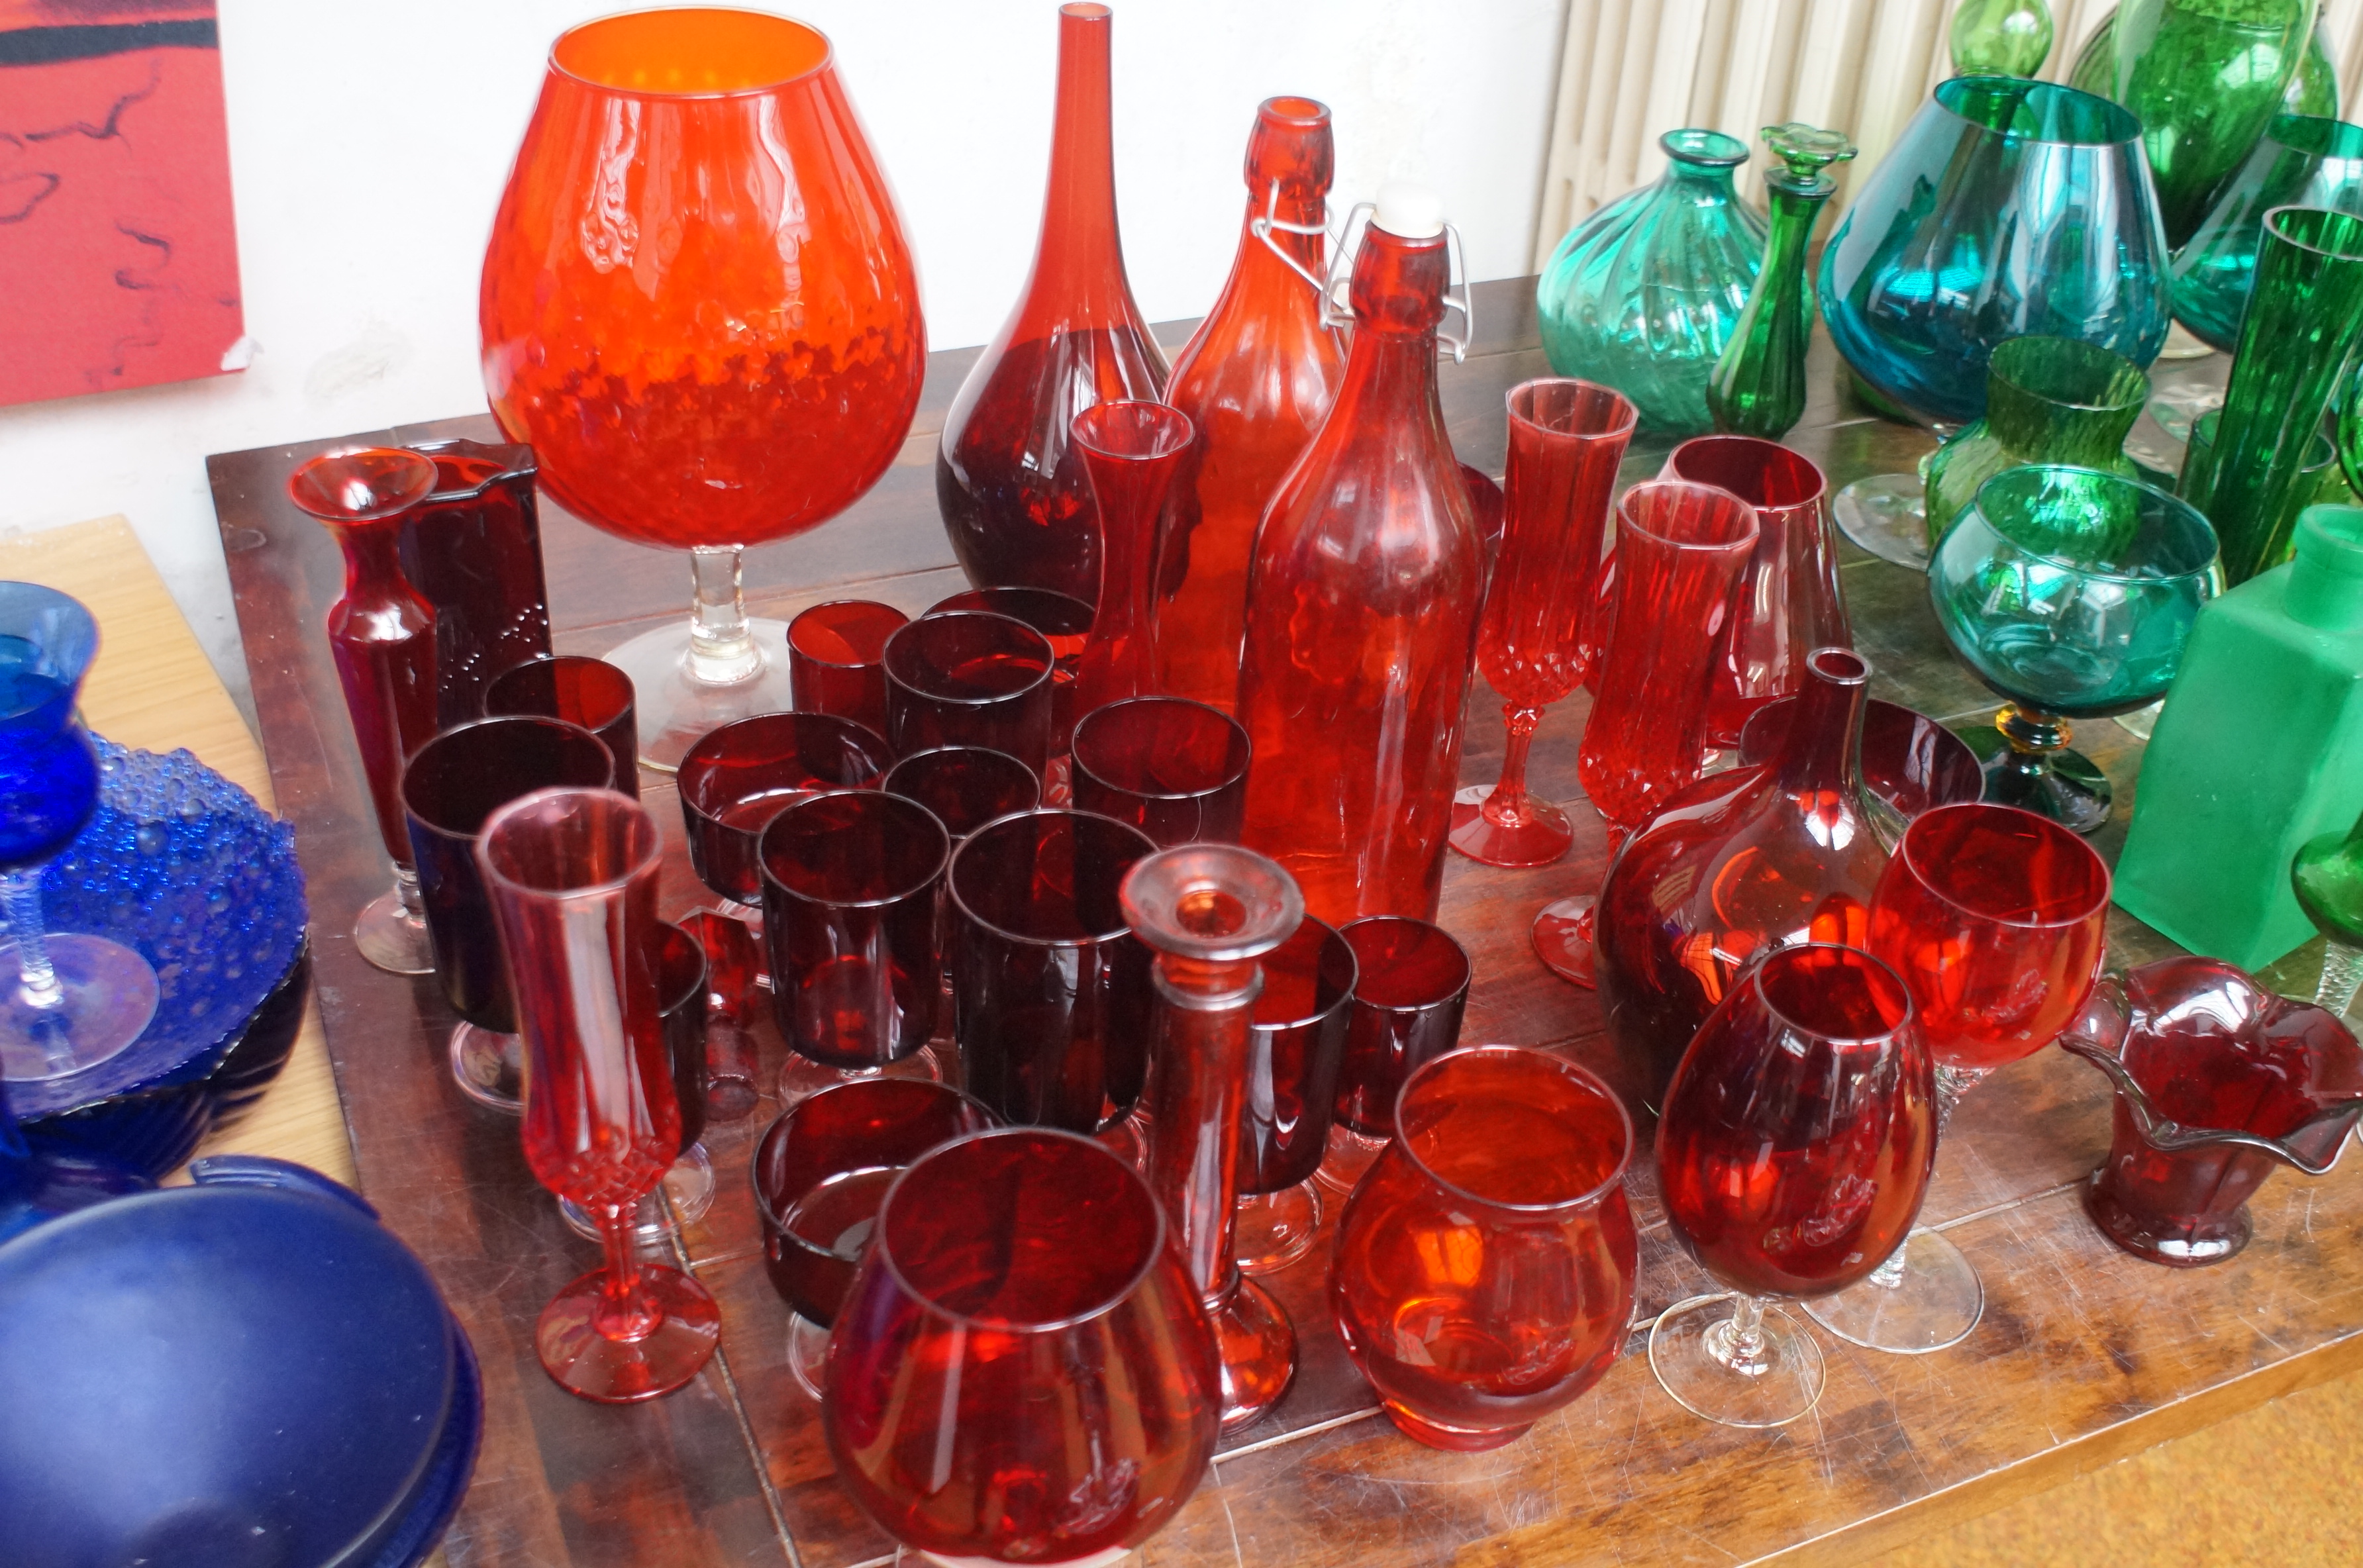 Collection of Red Art Glassware